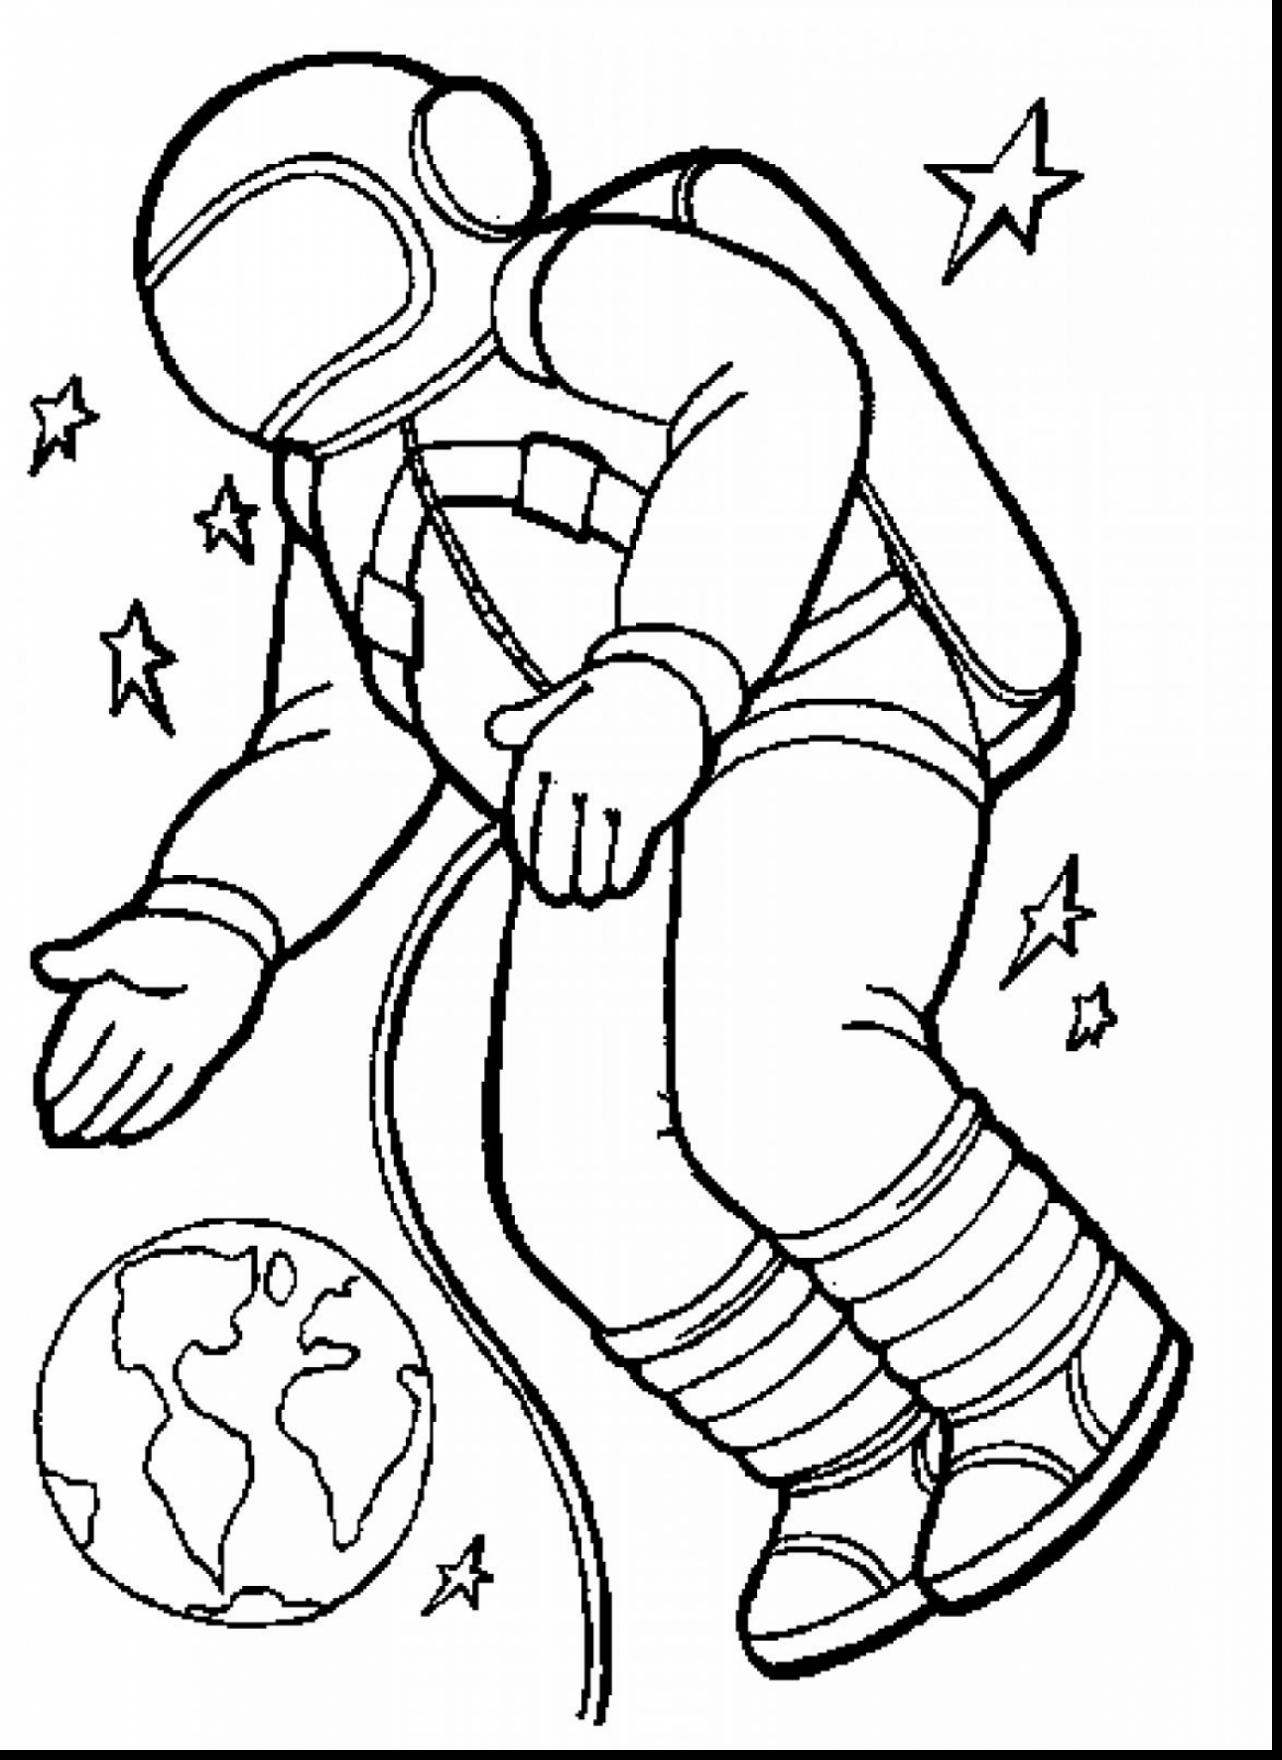 Space Rocket Coloring Page at GetDrawings | Free download